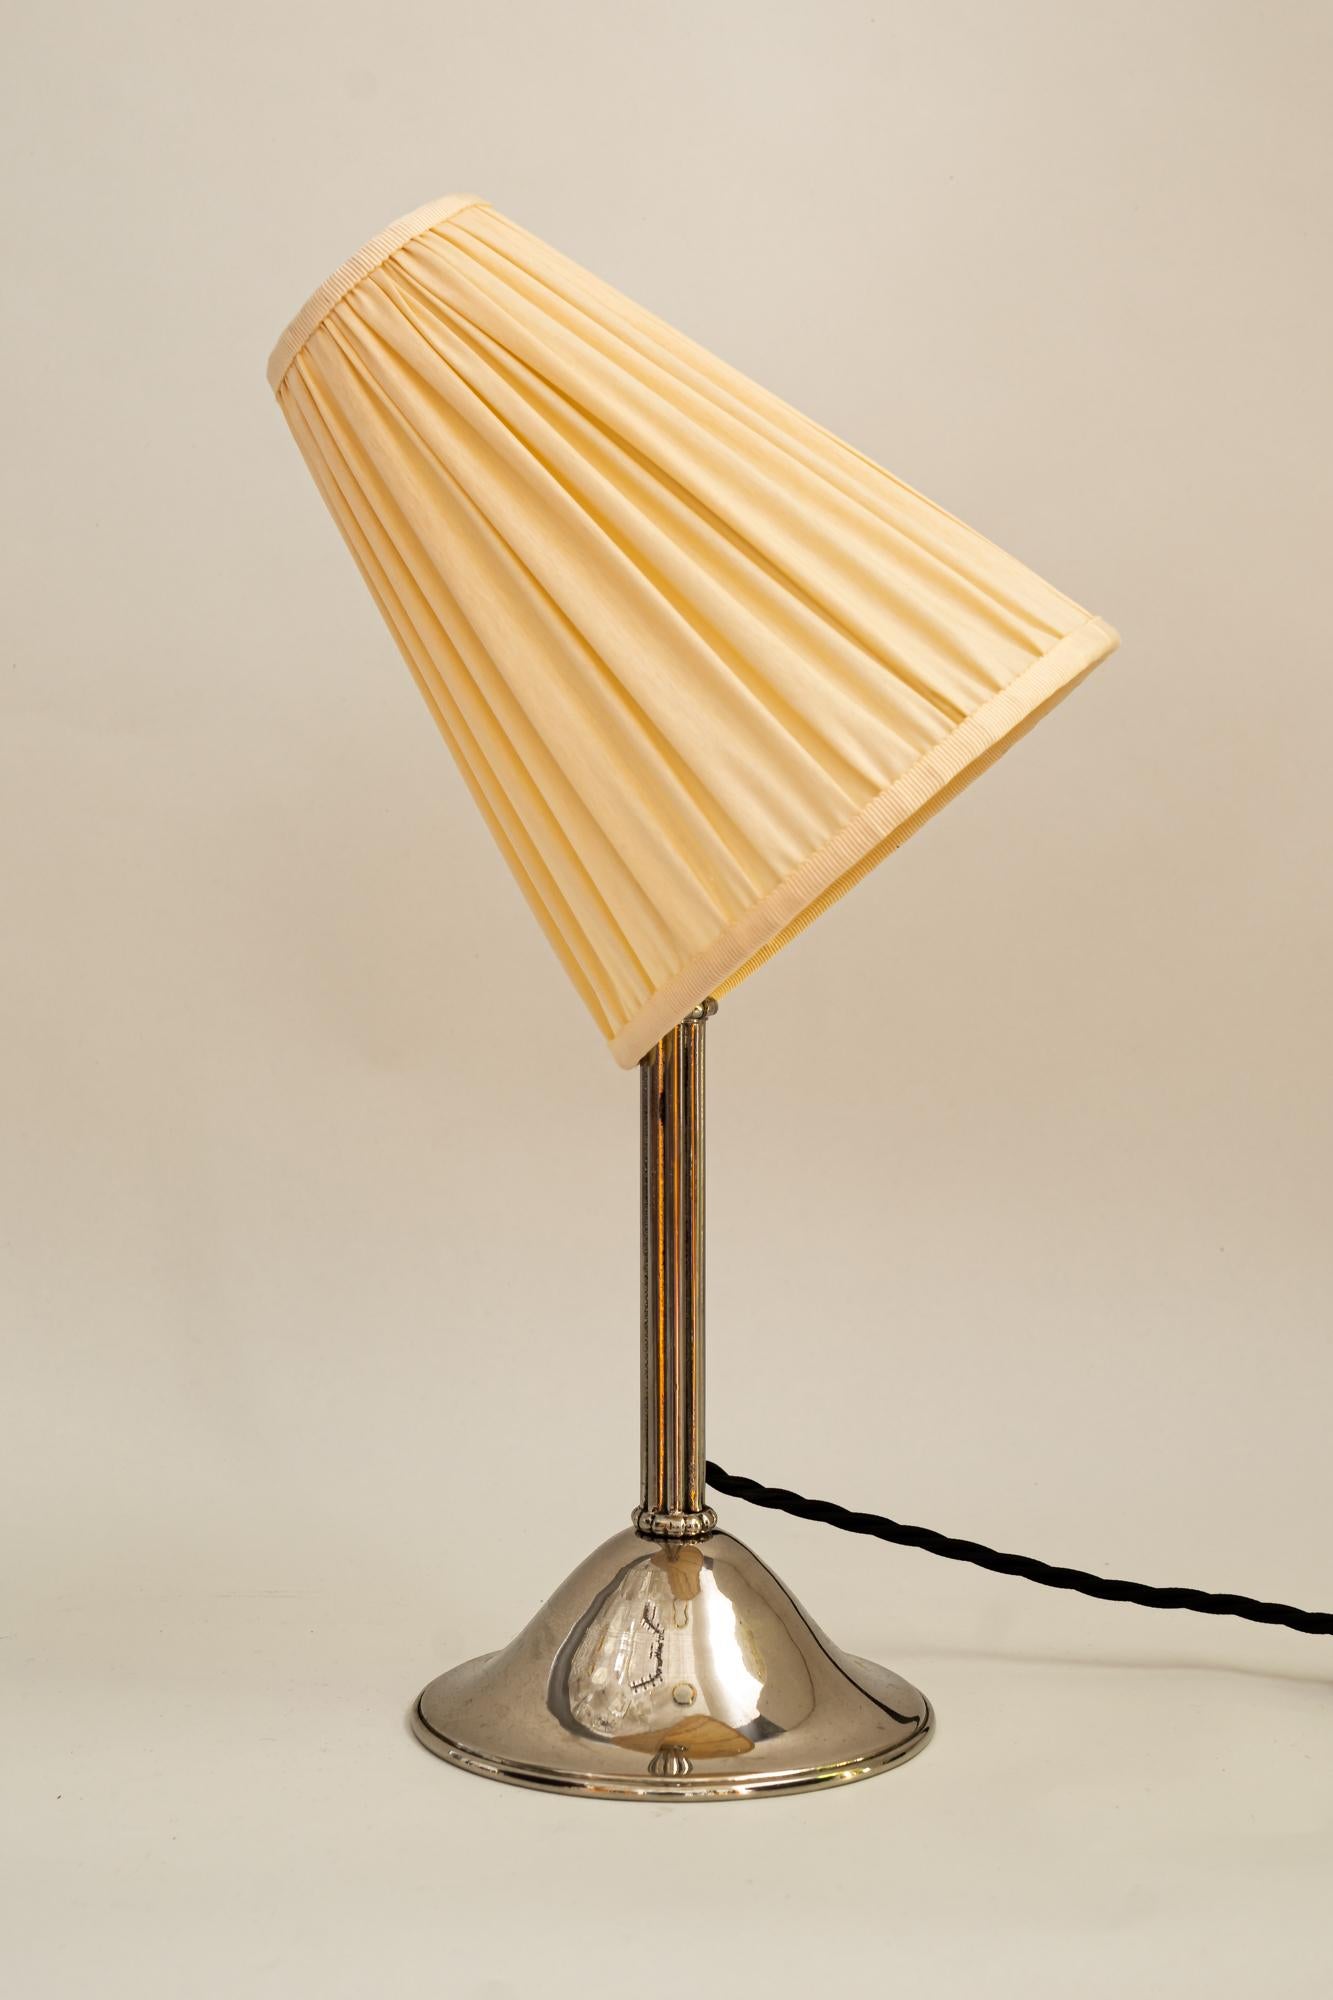 Austrian Nickel - Plated Art Deco Table Lamp with Fabric Shade, Around 1920s